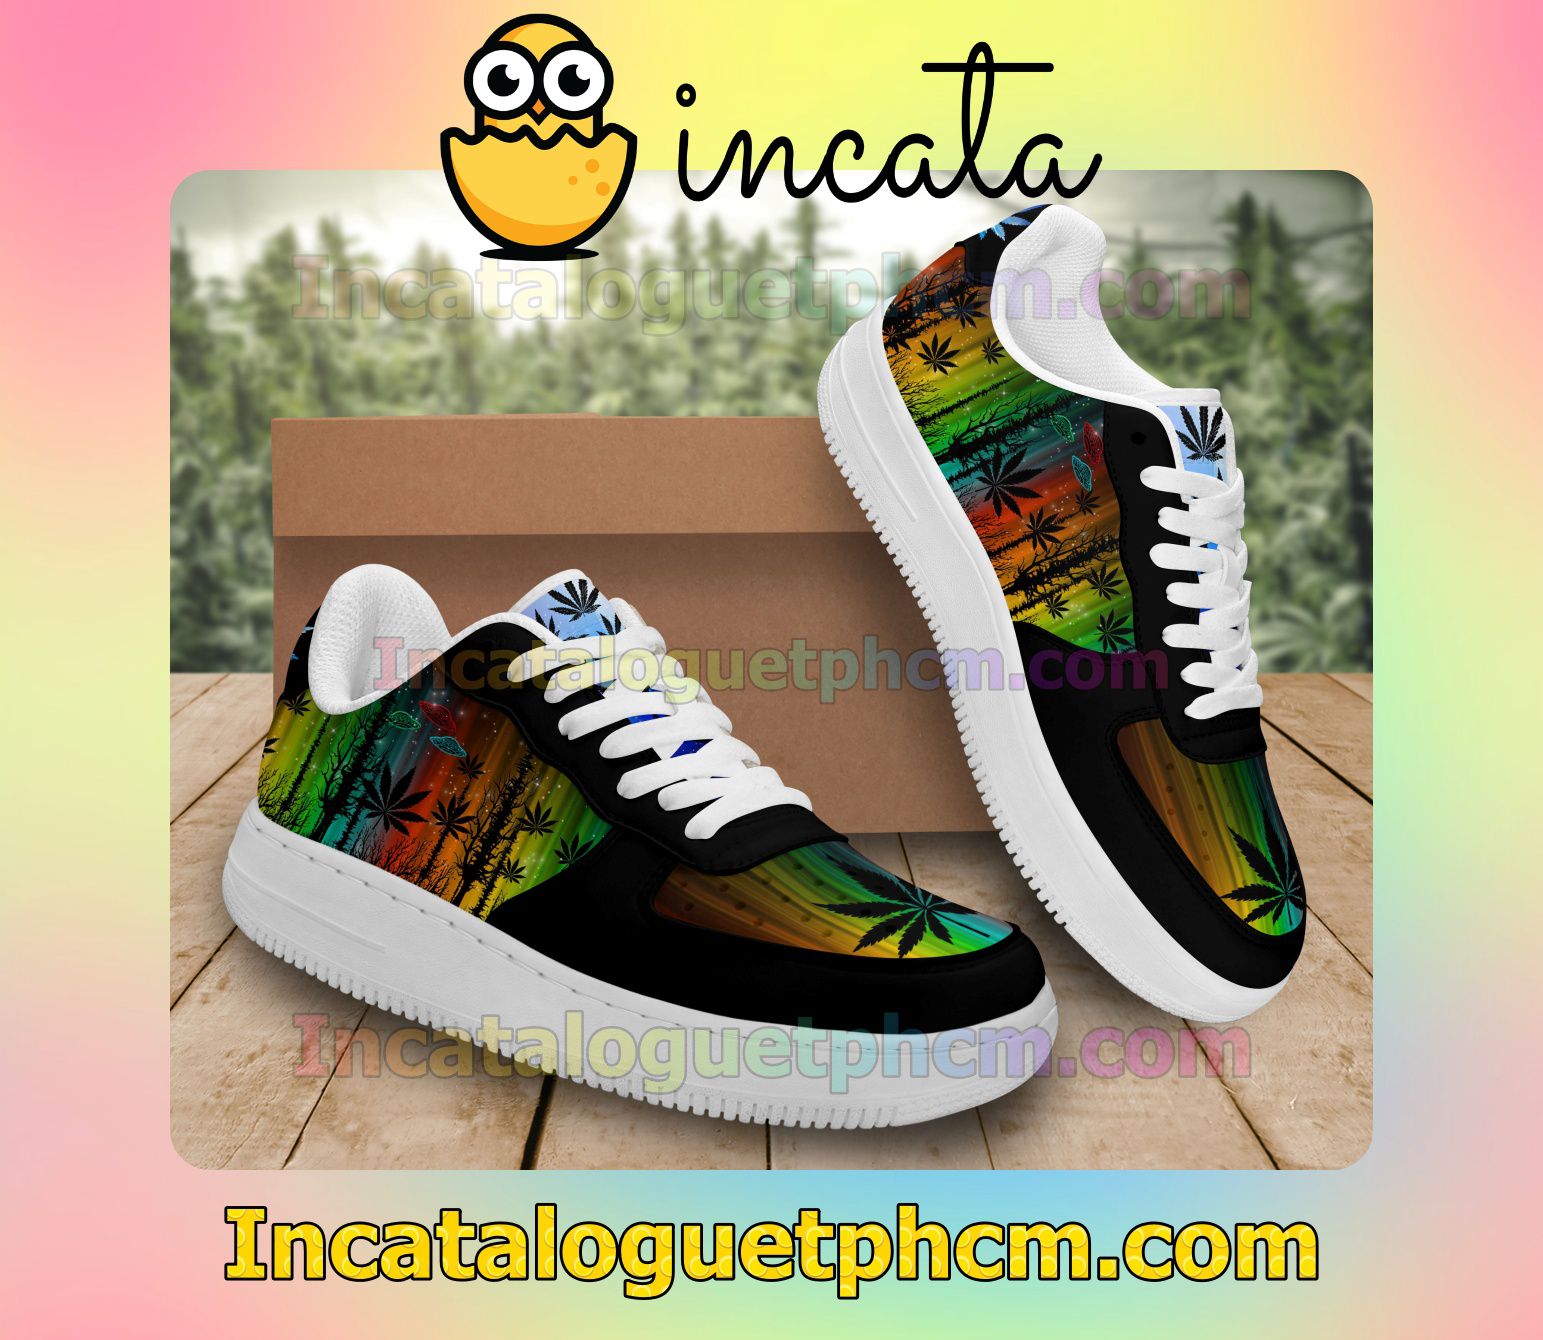 Drop Shipping Hologram UFO Cannabis Weed Nike Shoes Sneakers